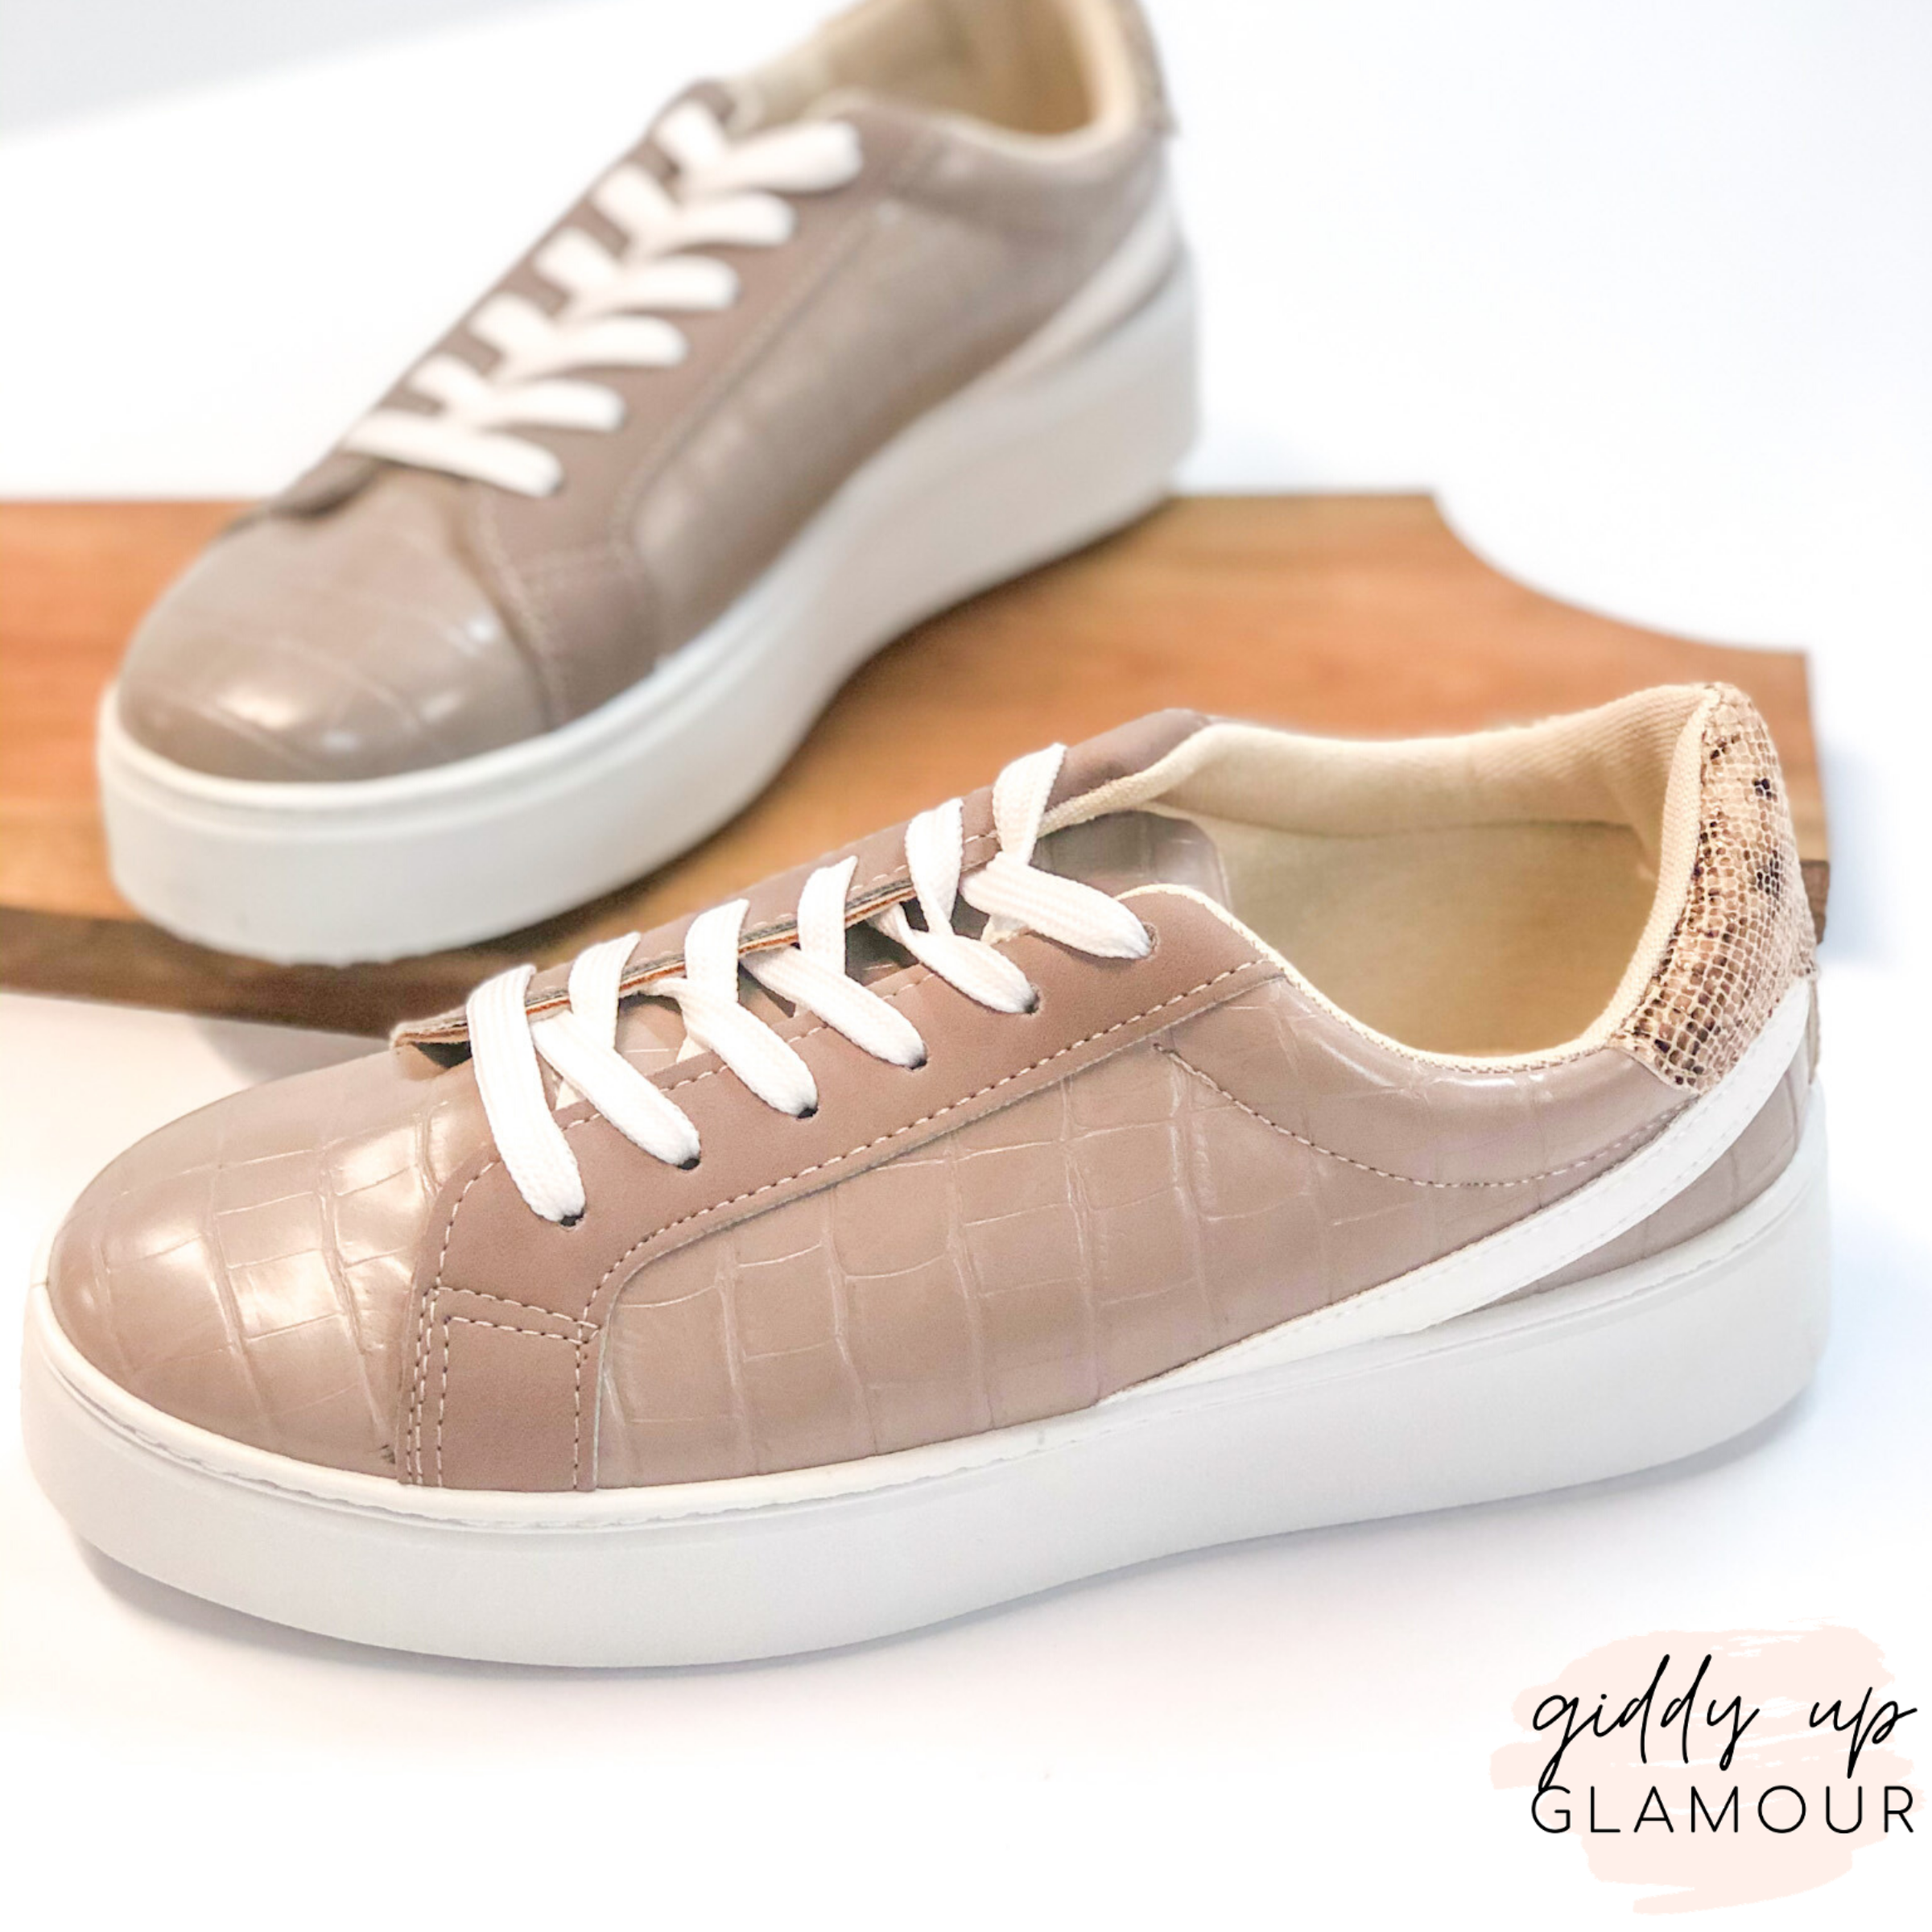 Last Chance Size 5.5, 6, & 7 | Can't Stay Away Crocodile Sneakers with Snakeskin Heel Patch in Grey - Giddy Up Glamour Boutique